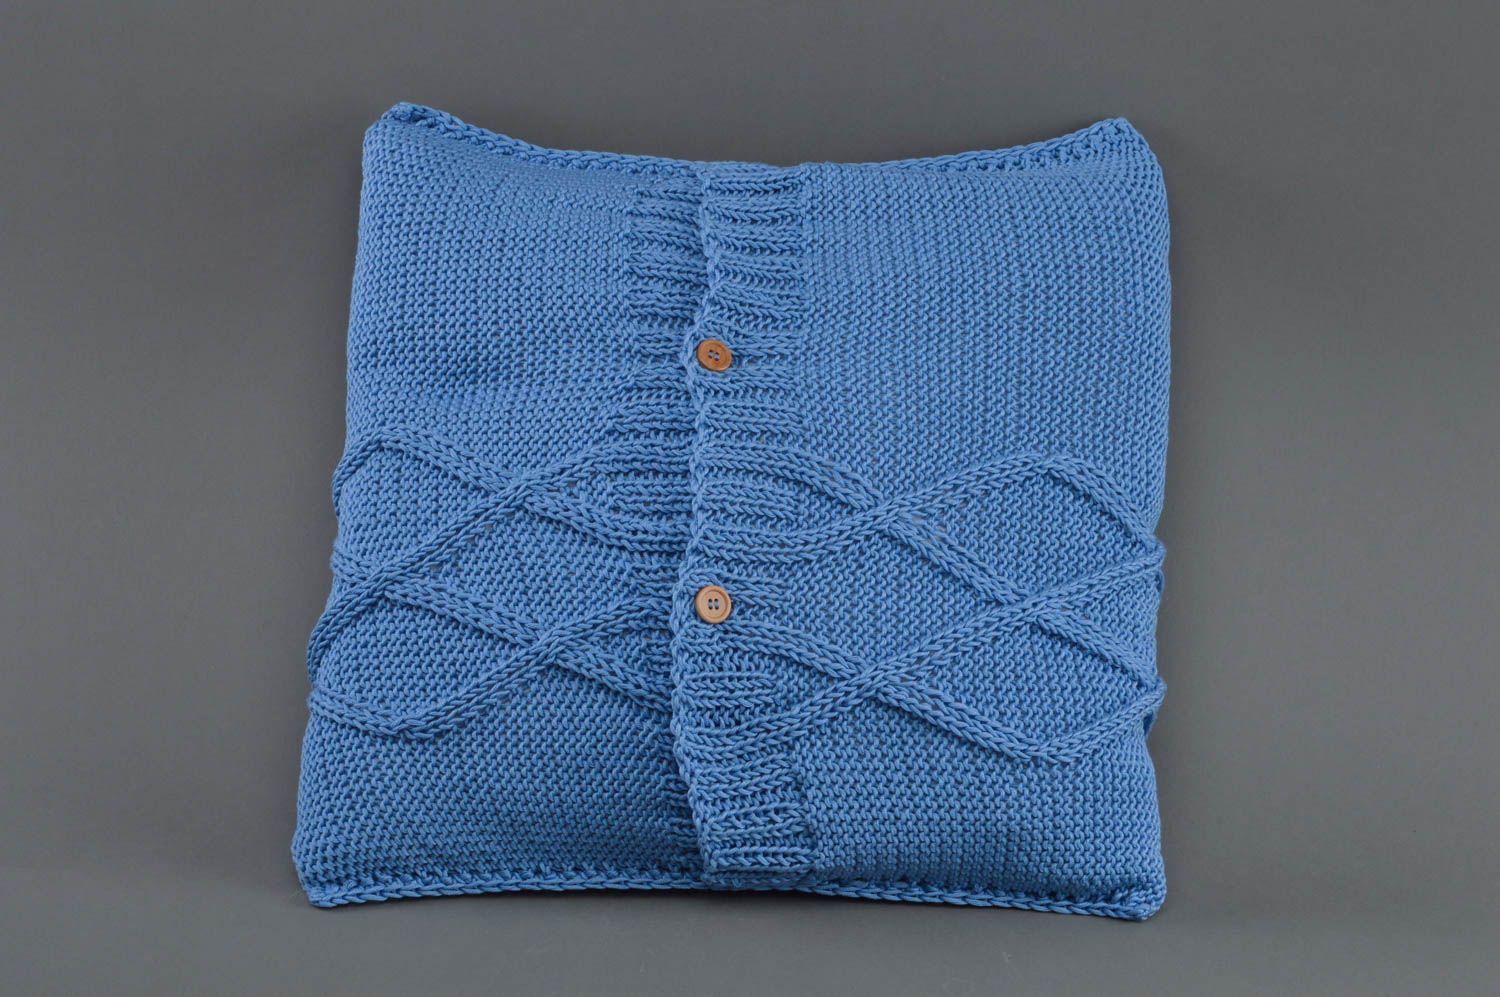 Handmade decorative accent pillow knitted of blue cotton threads with buttons photo 2